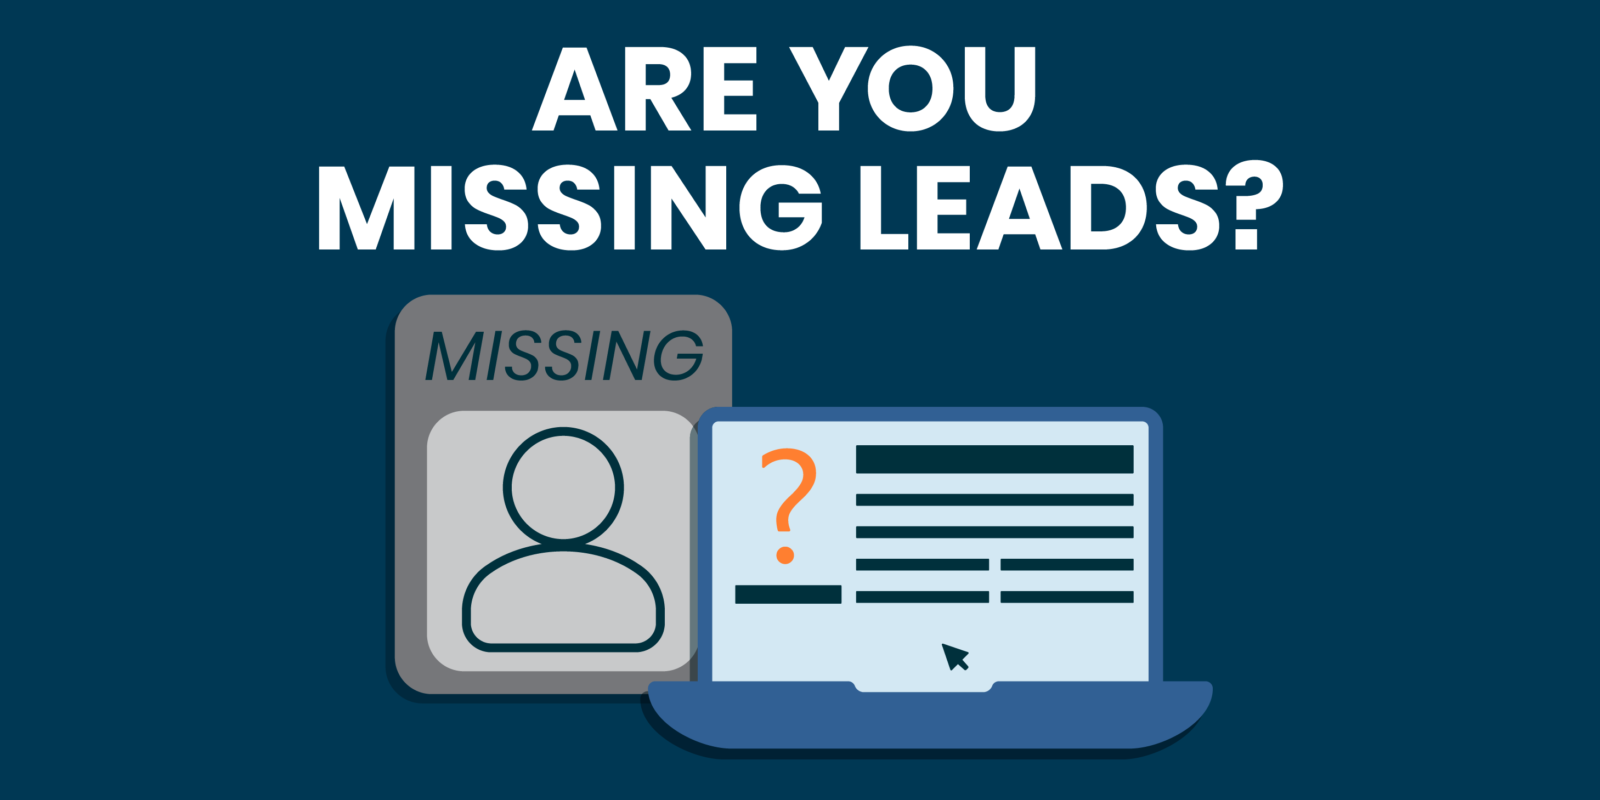 Are you missing leads?